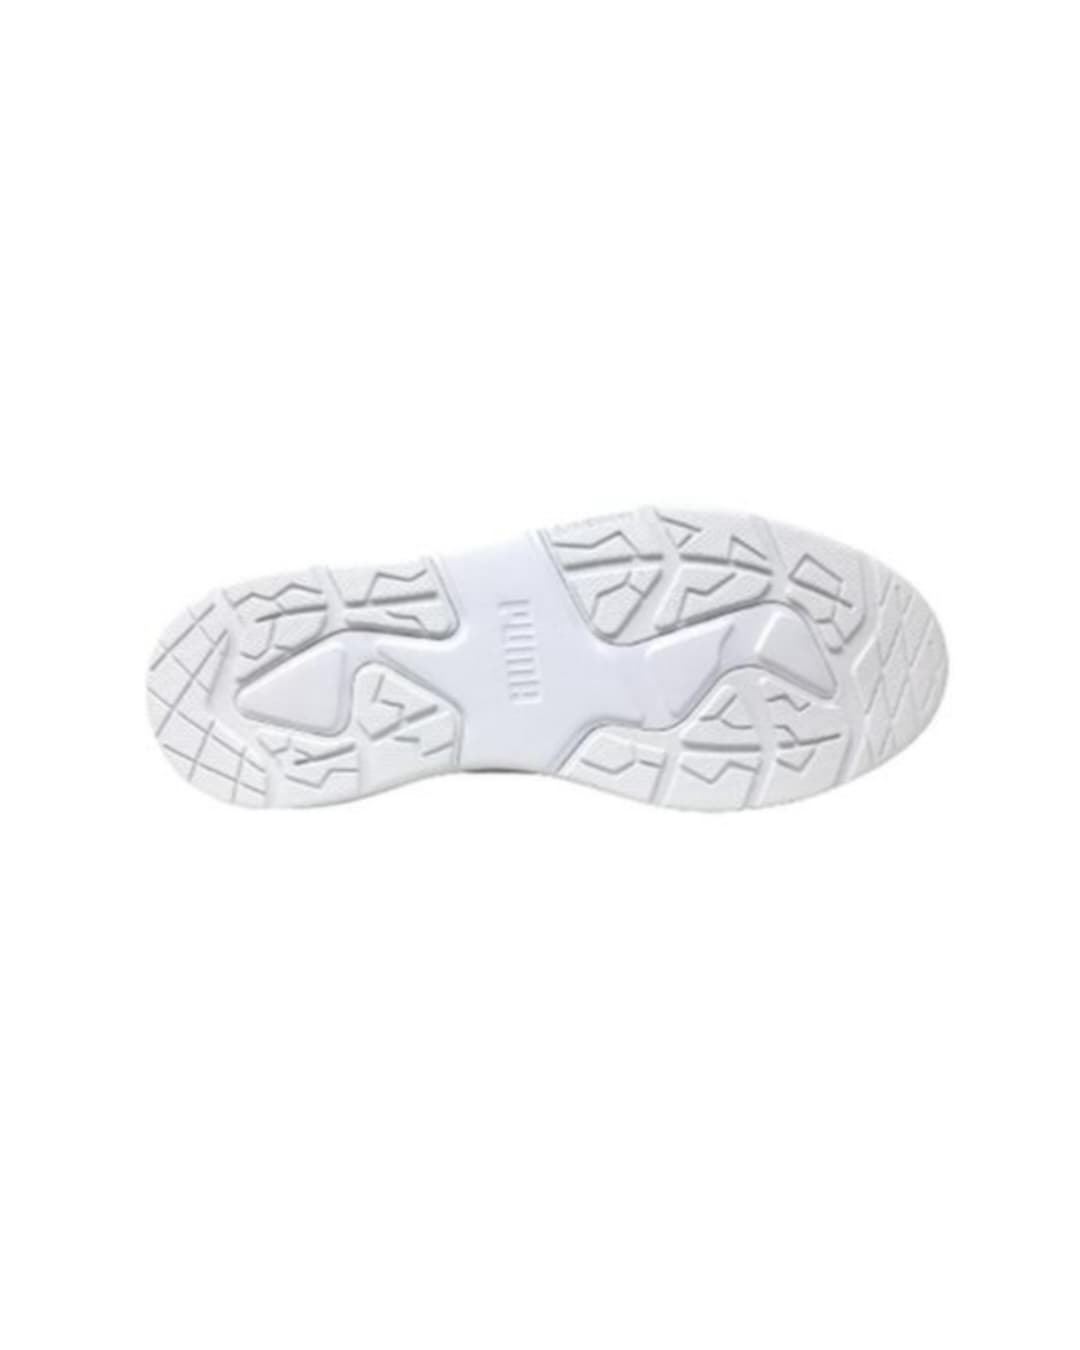 Puma Evolve Court Jr White Children's Sneakers with Lace - Image 3